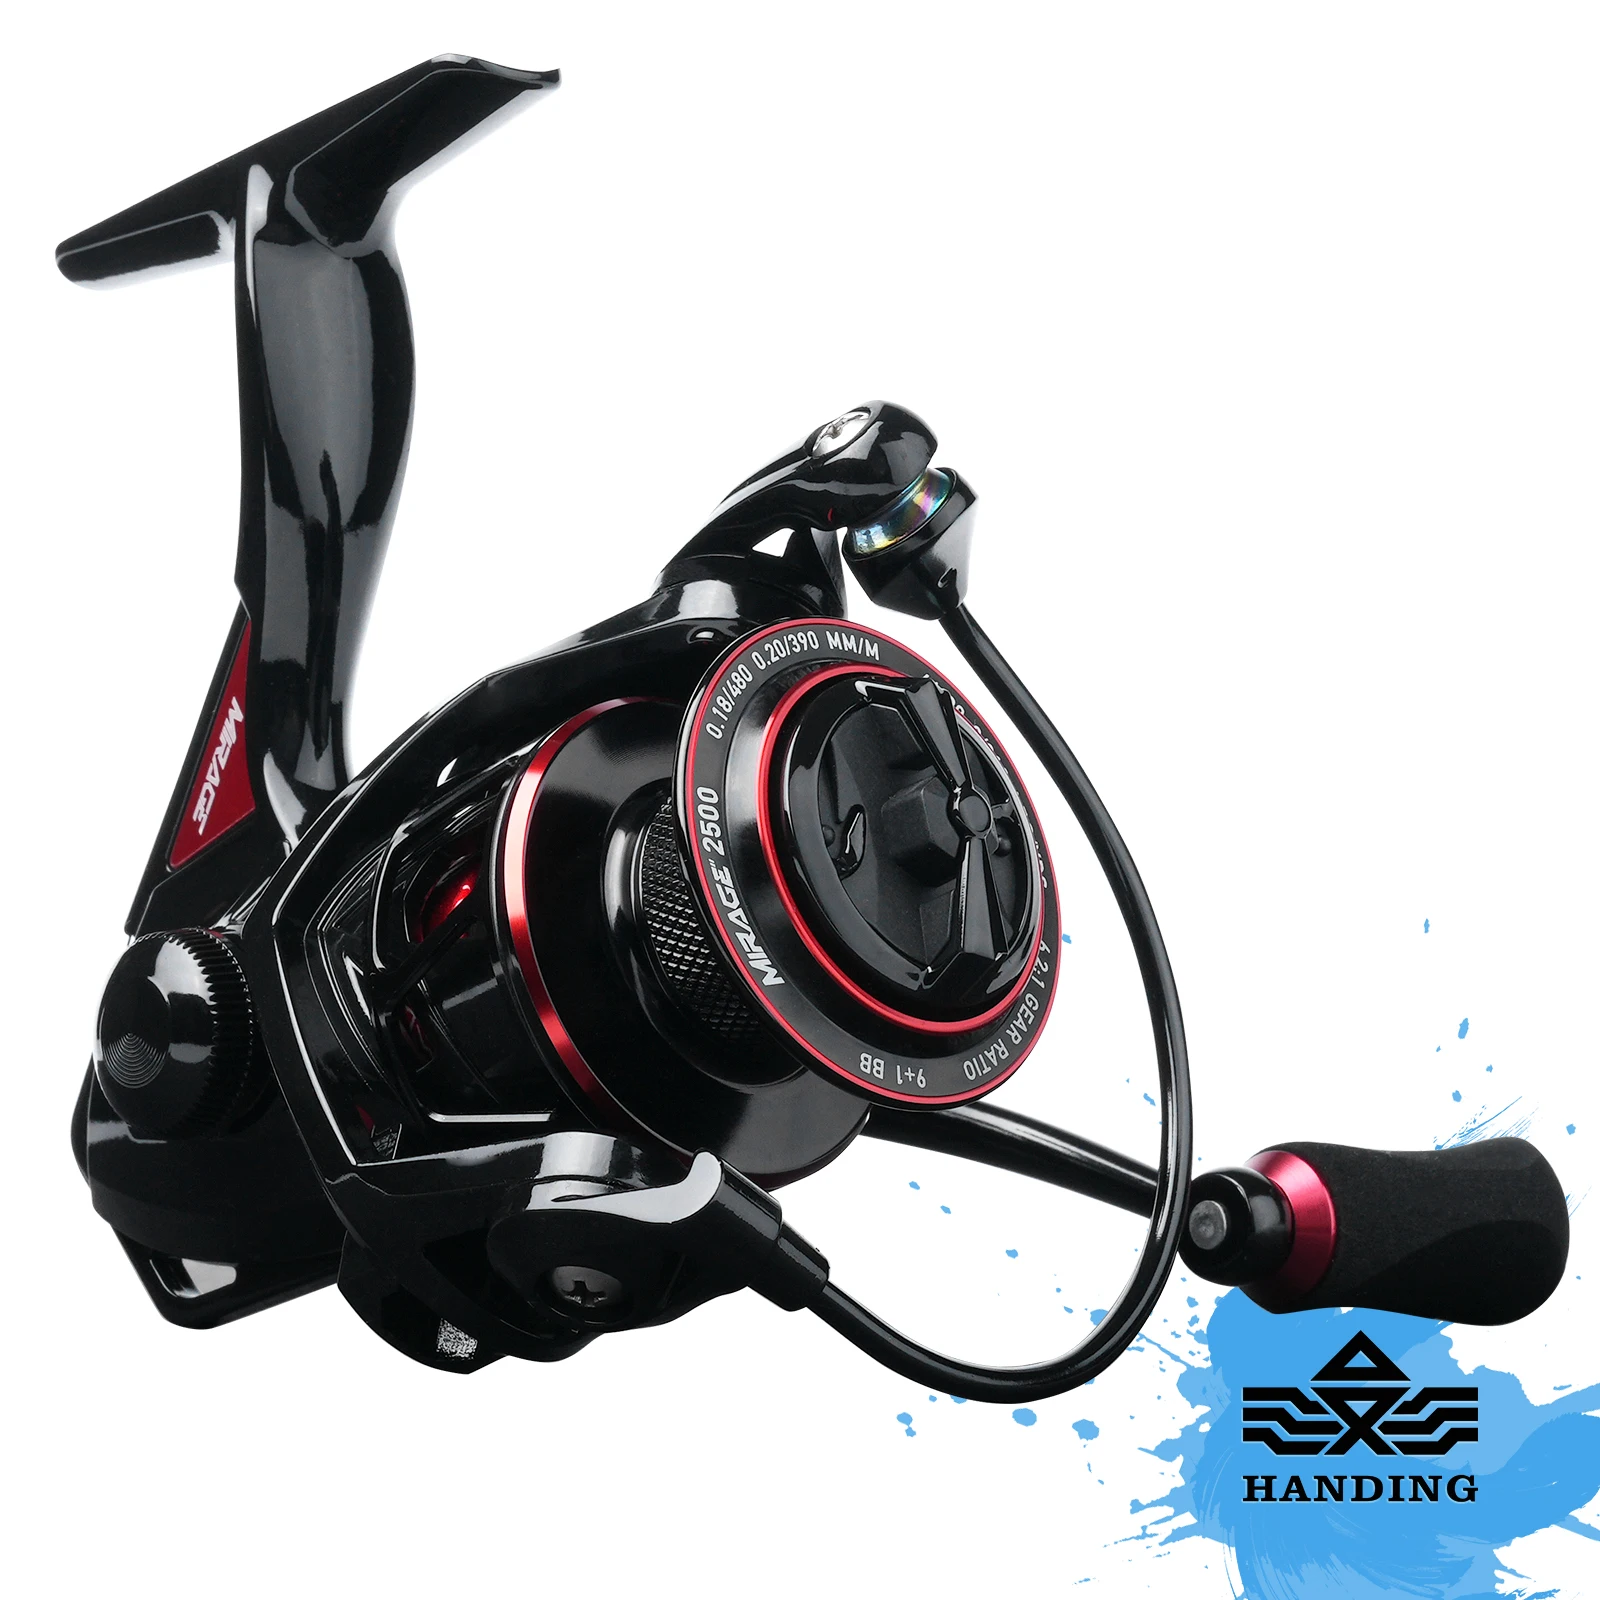 HANDING Magic Spinning Reel Lightweight Carbon Fiber Fishing Reels 15KG Max  Drag 10+1BB Accurate Casting 2000 Long Casting 2500 - AliExpress